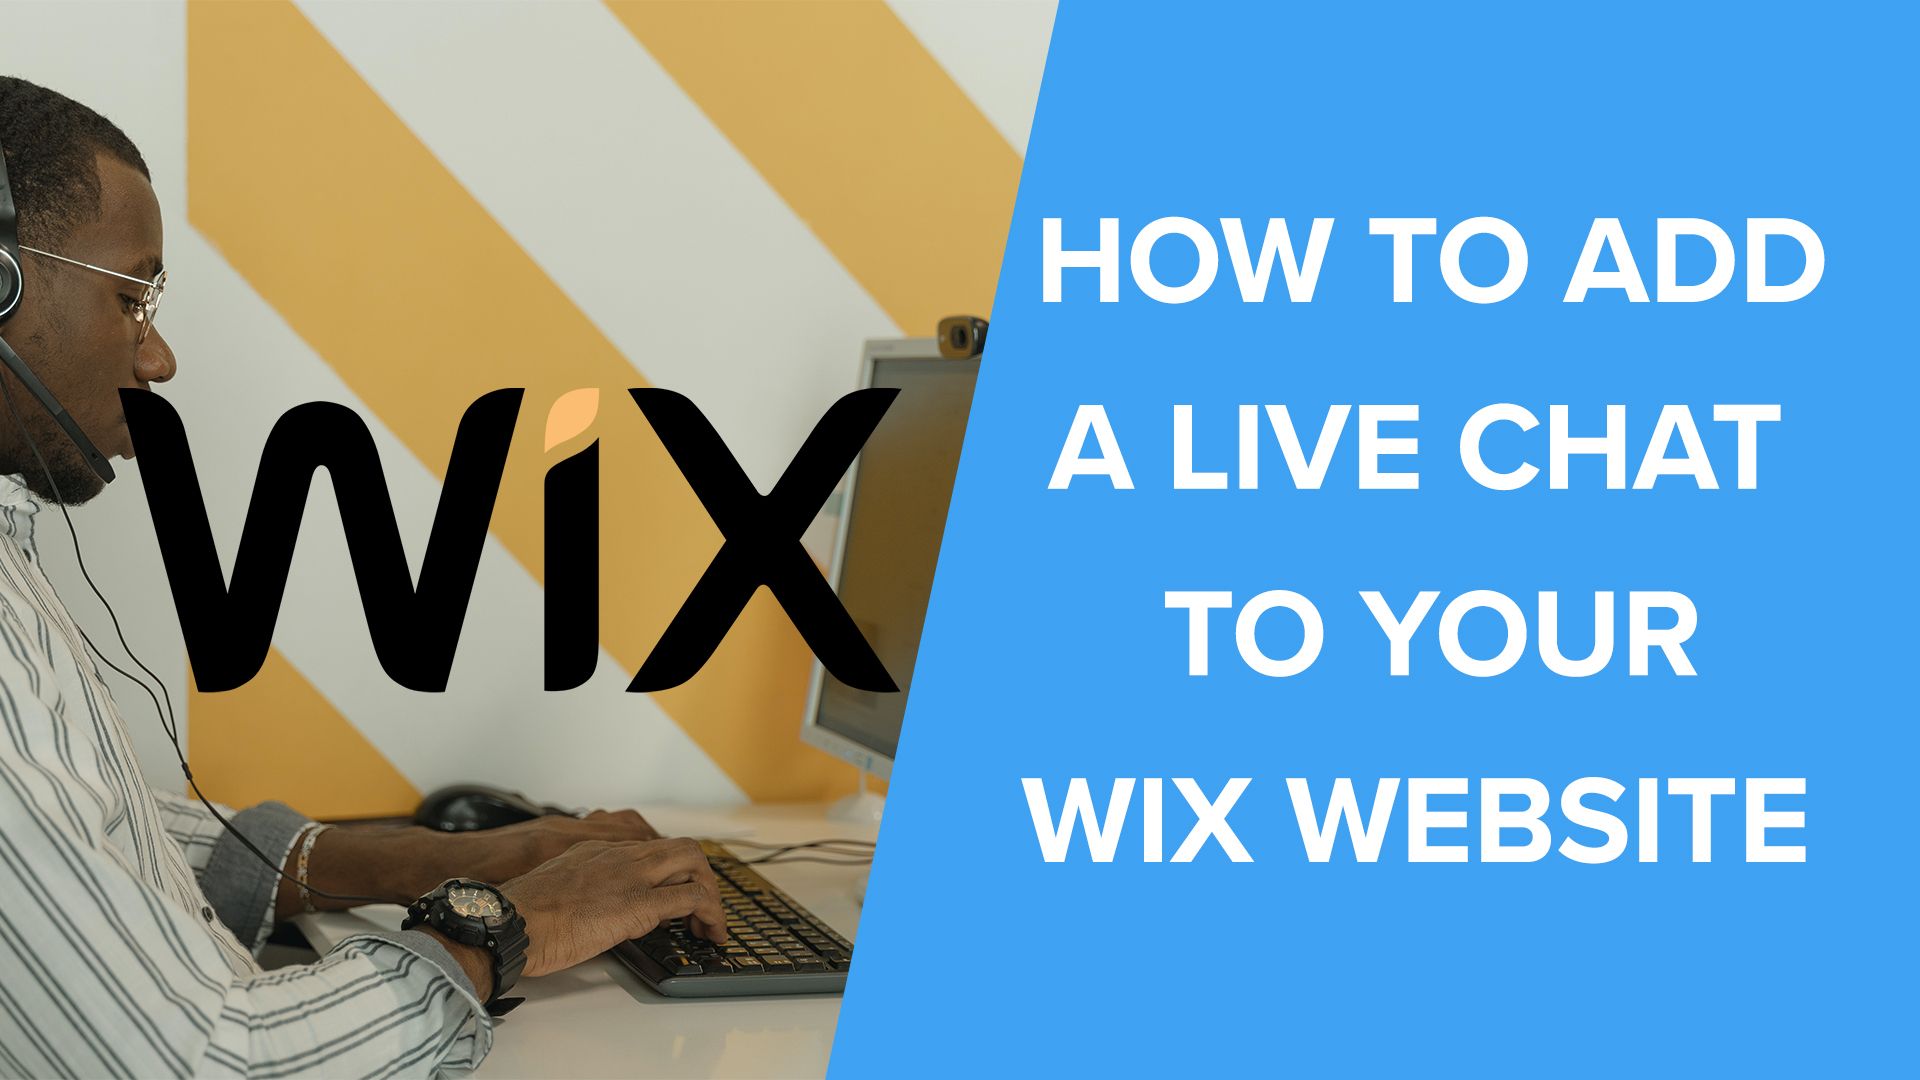 How to add a free live chat to your Wix website